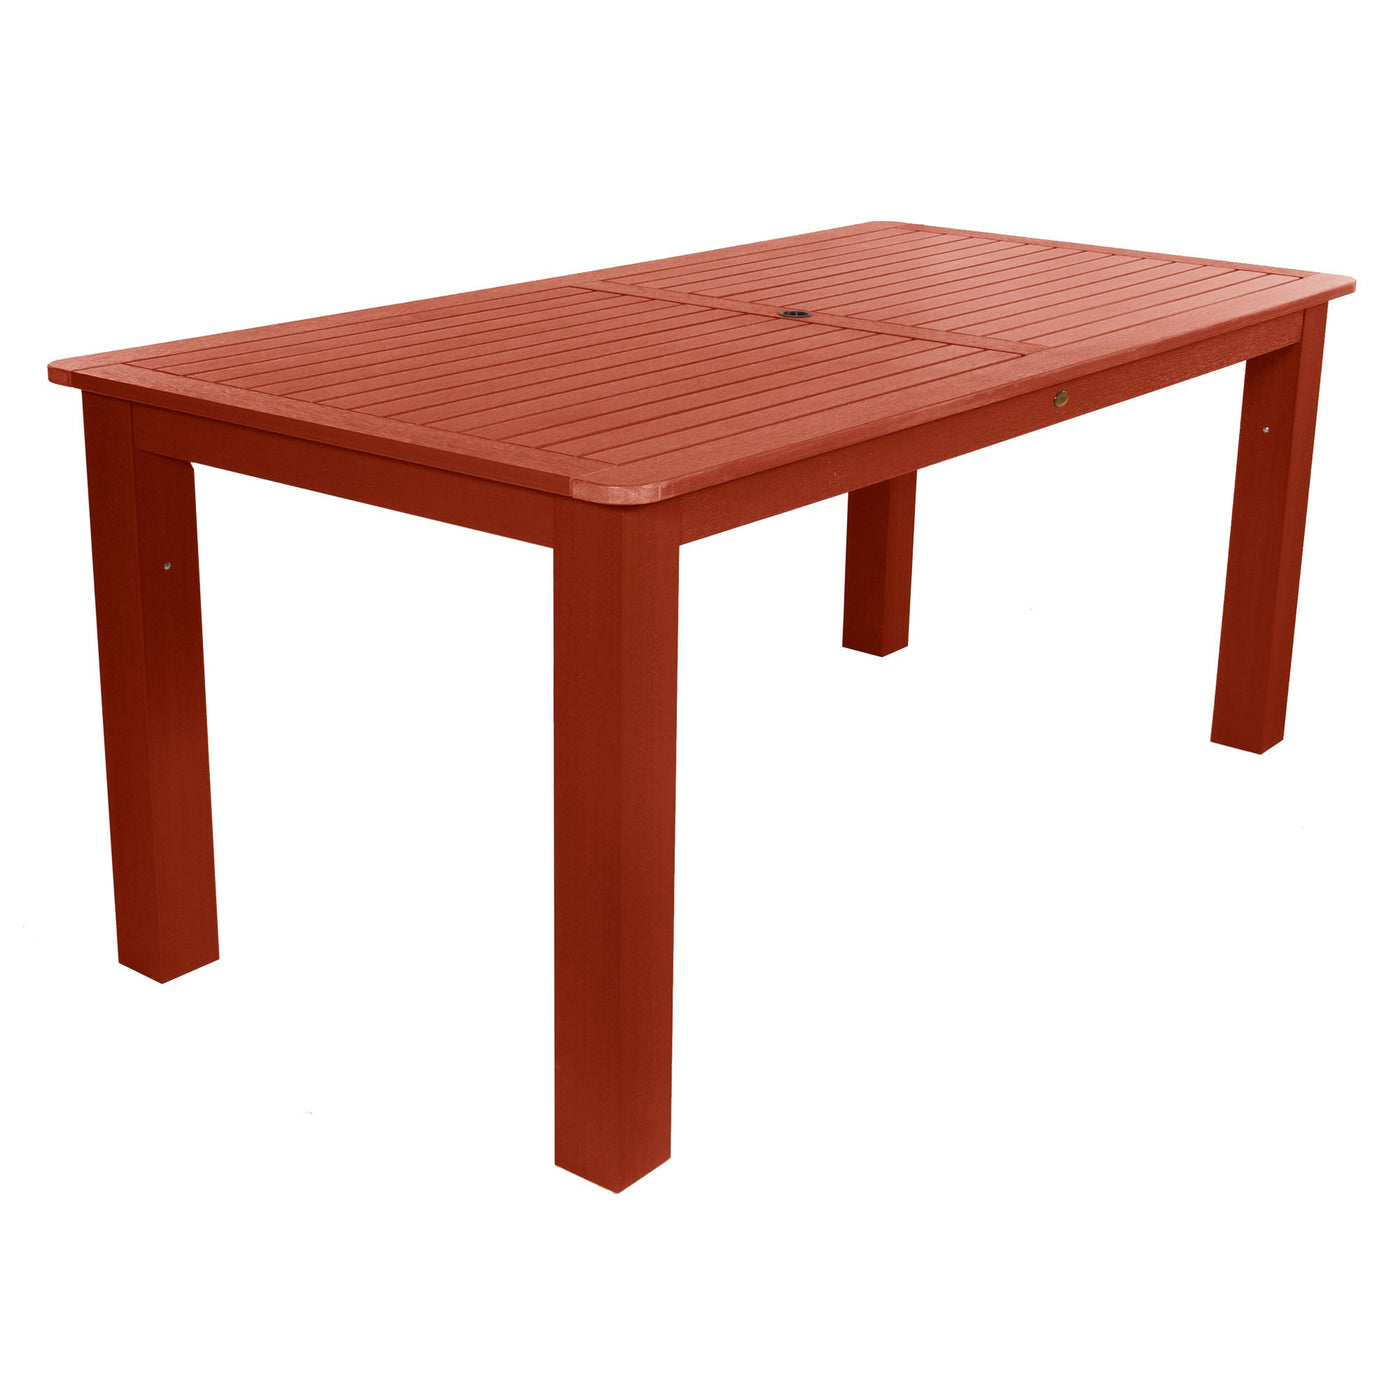 Rectangular 42in x 84in Oversized Dining Table - Counter Height Dining Highwood USA Rustic Red 